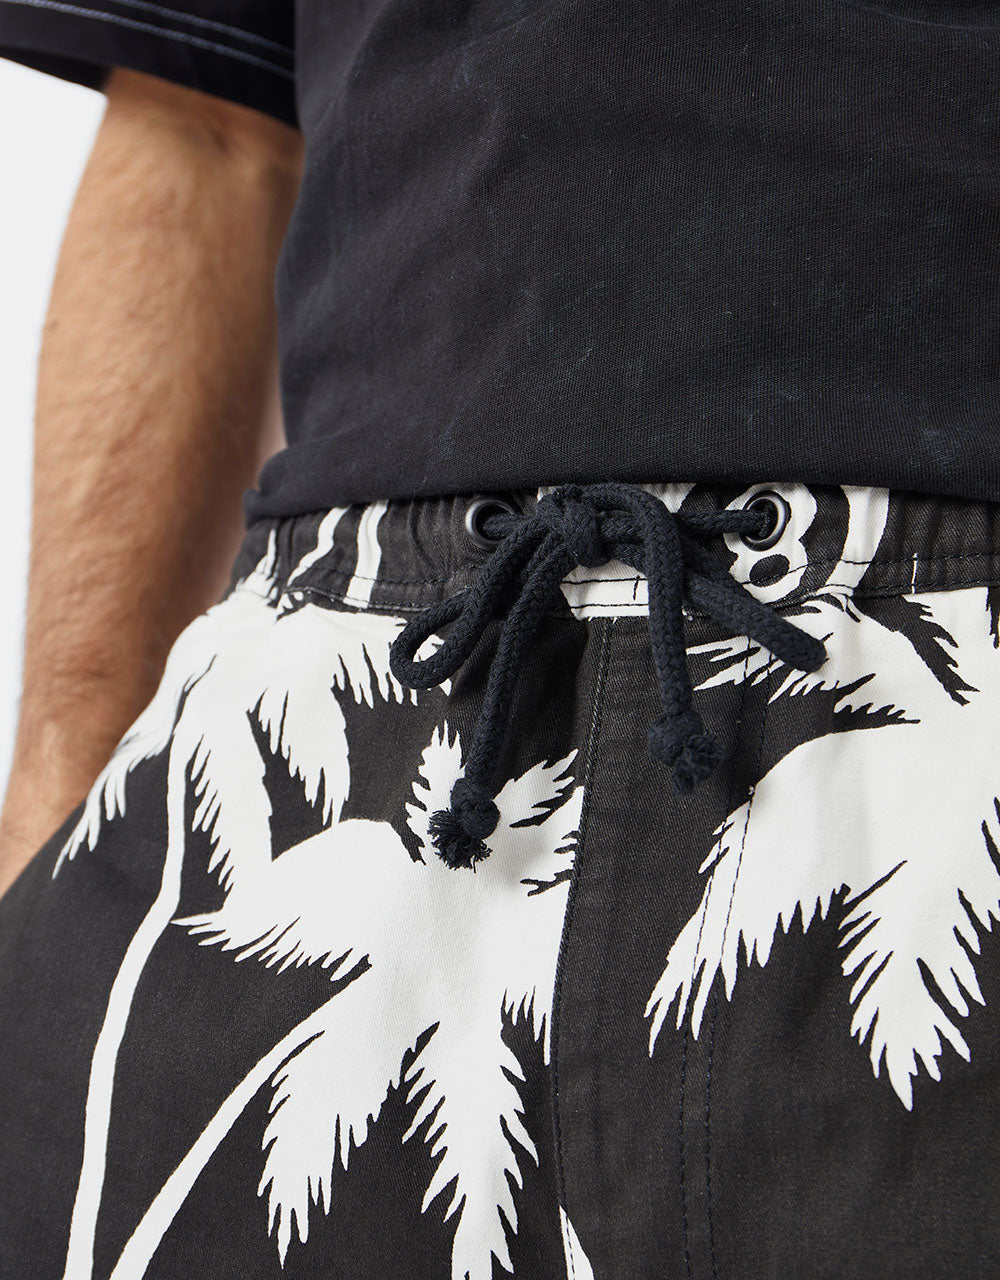 Route One Organic Baggy Pants - Palms Black/White